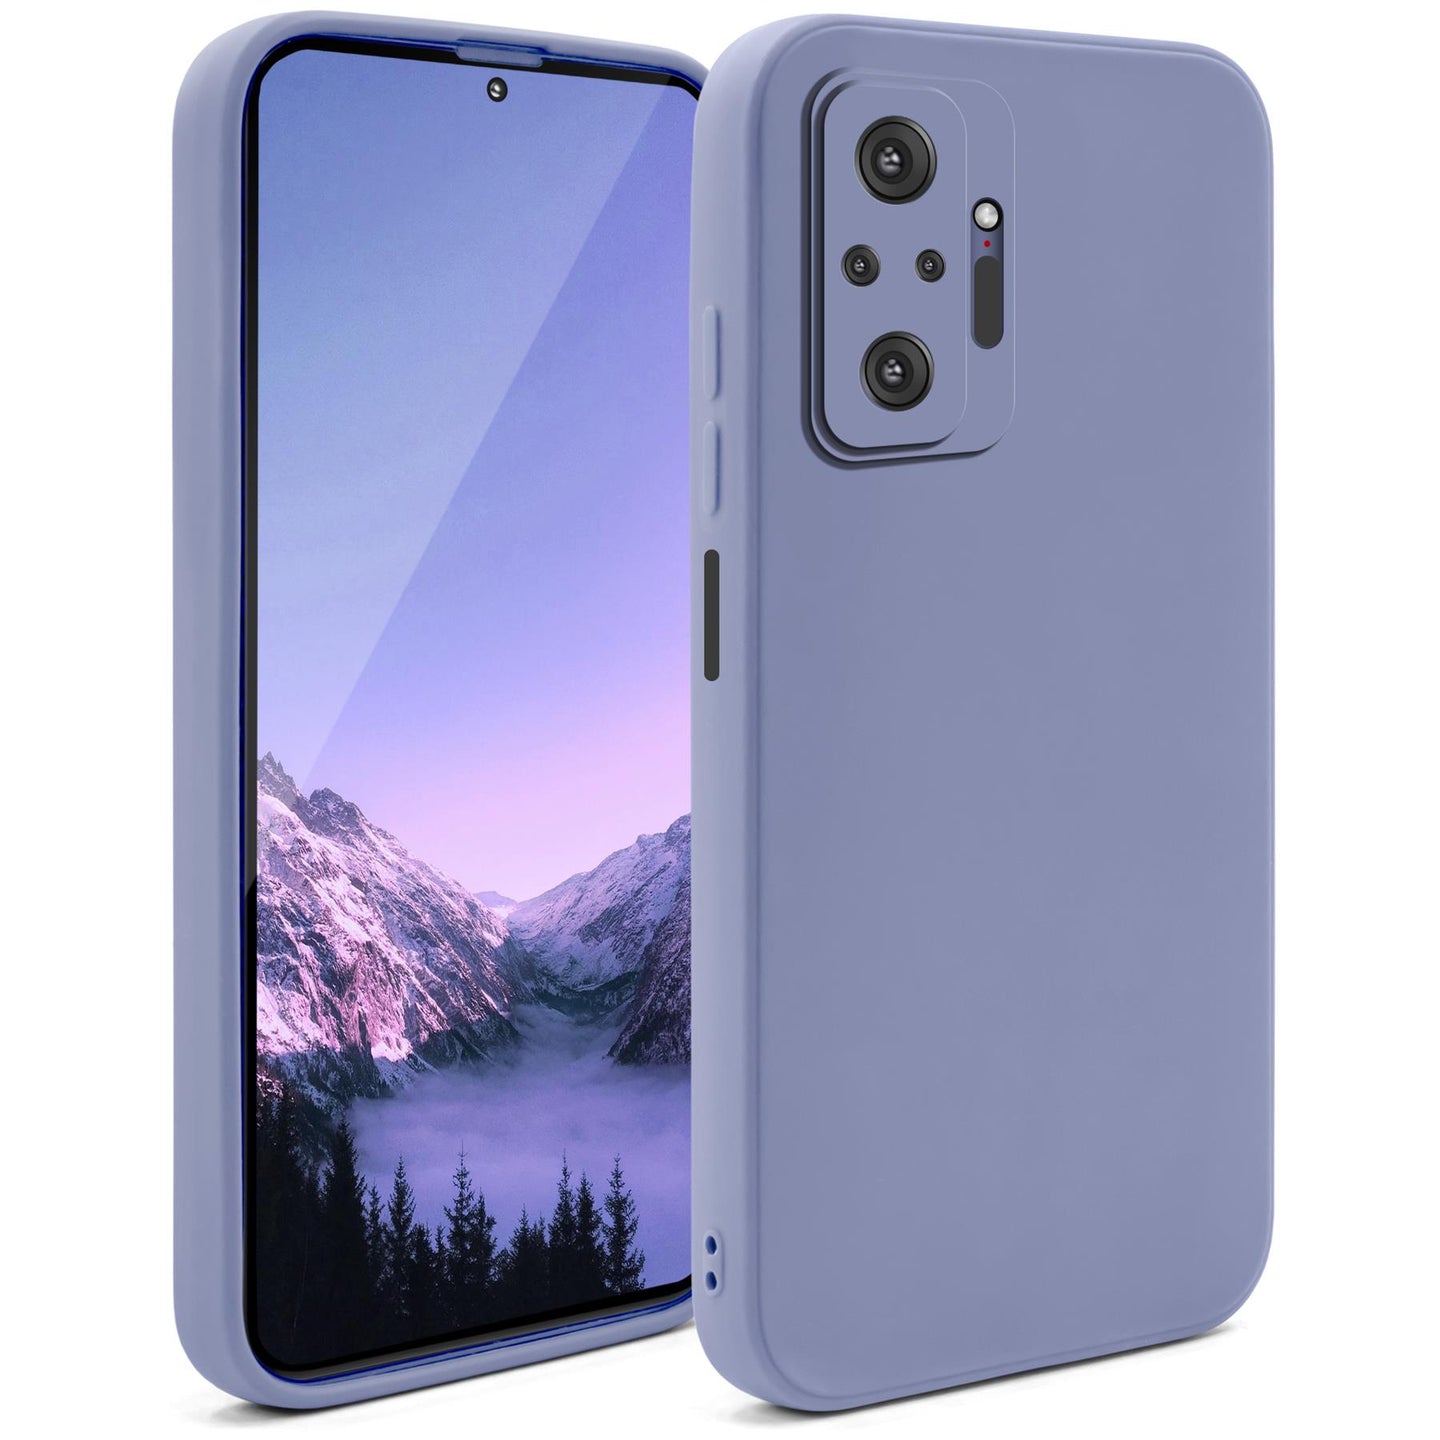 Moozy Minimalist Series Silicone Case for Xiaomi Redmi Note 10 Pro and Note 10 Pro Max, Blue Grey - Matte Finish Lightweight Mobile Phone Case Slim Soft Protective TPU Cover with Matte Surface